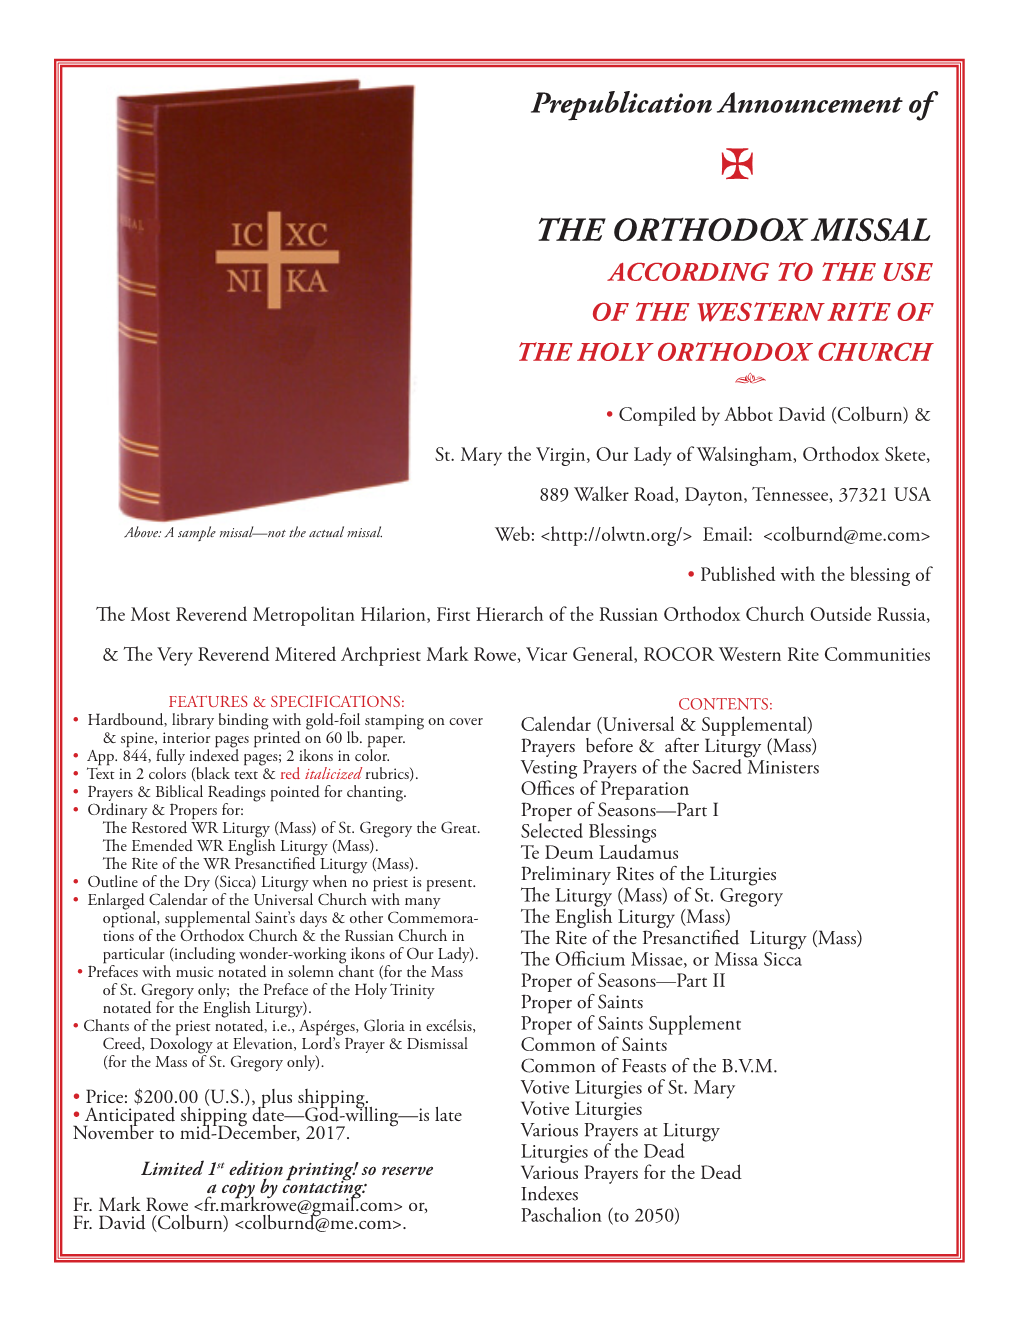 THE ORTHODOX MISSAL ACCORDING to the USE of the WESTERN RITE of the HOLY ORTHODOX CHURCH Ƒ • Compiled by Abbot David (Colburn) & St